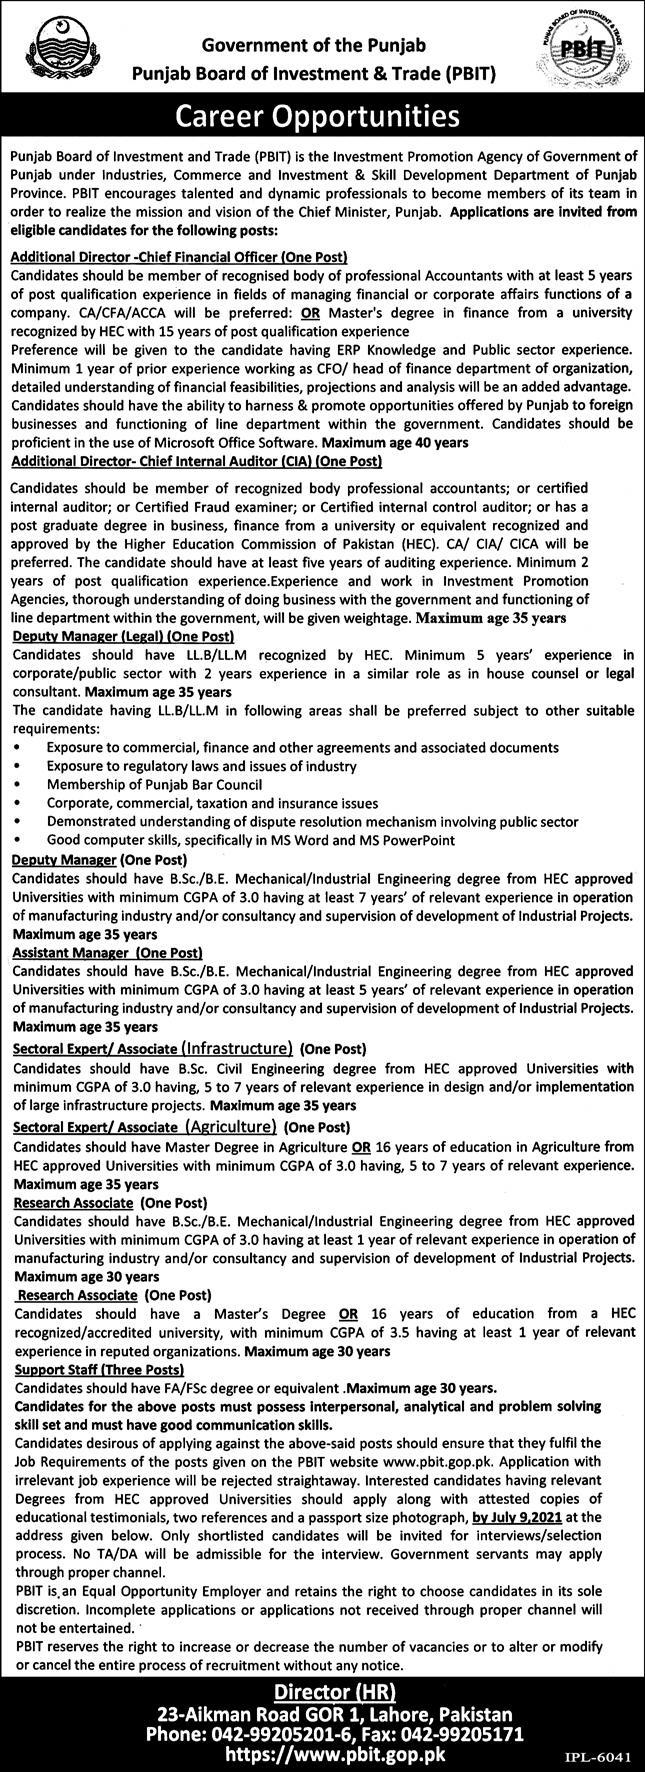 Punjab Board of Investment and Trade PBIT Lahore Jobs 2021